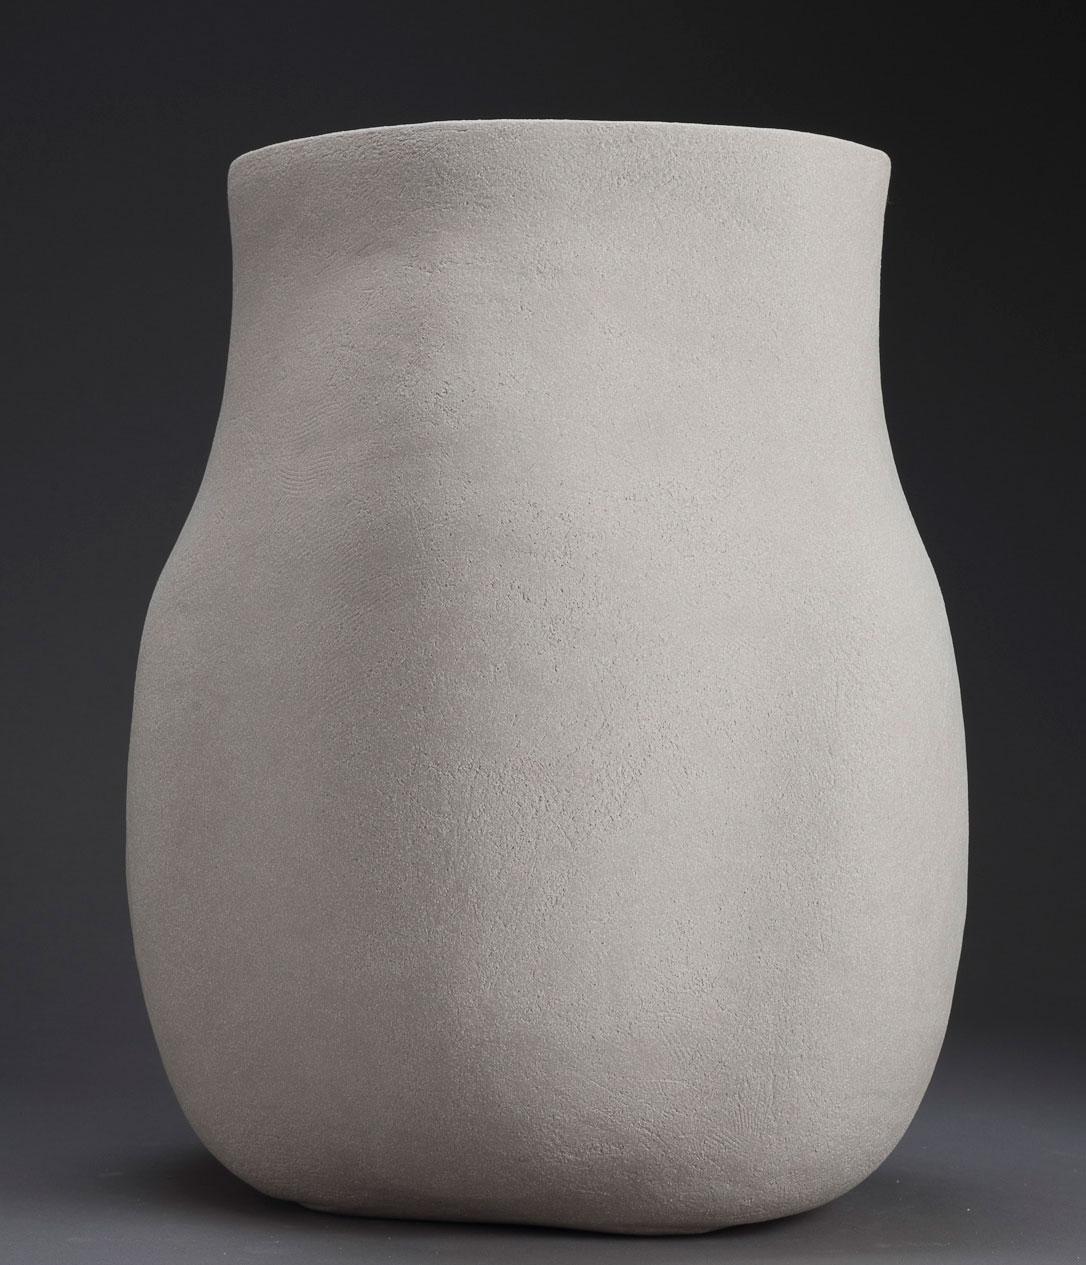 Steve Cartwright, Pregnant C

Handmade Sculptural Ceramic, Stoneware Clay, fired to 1250c

38 x 27 cm (14.96 x 10.63 in)

Edition of 5 per year